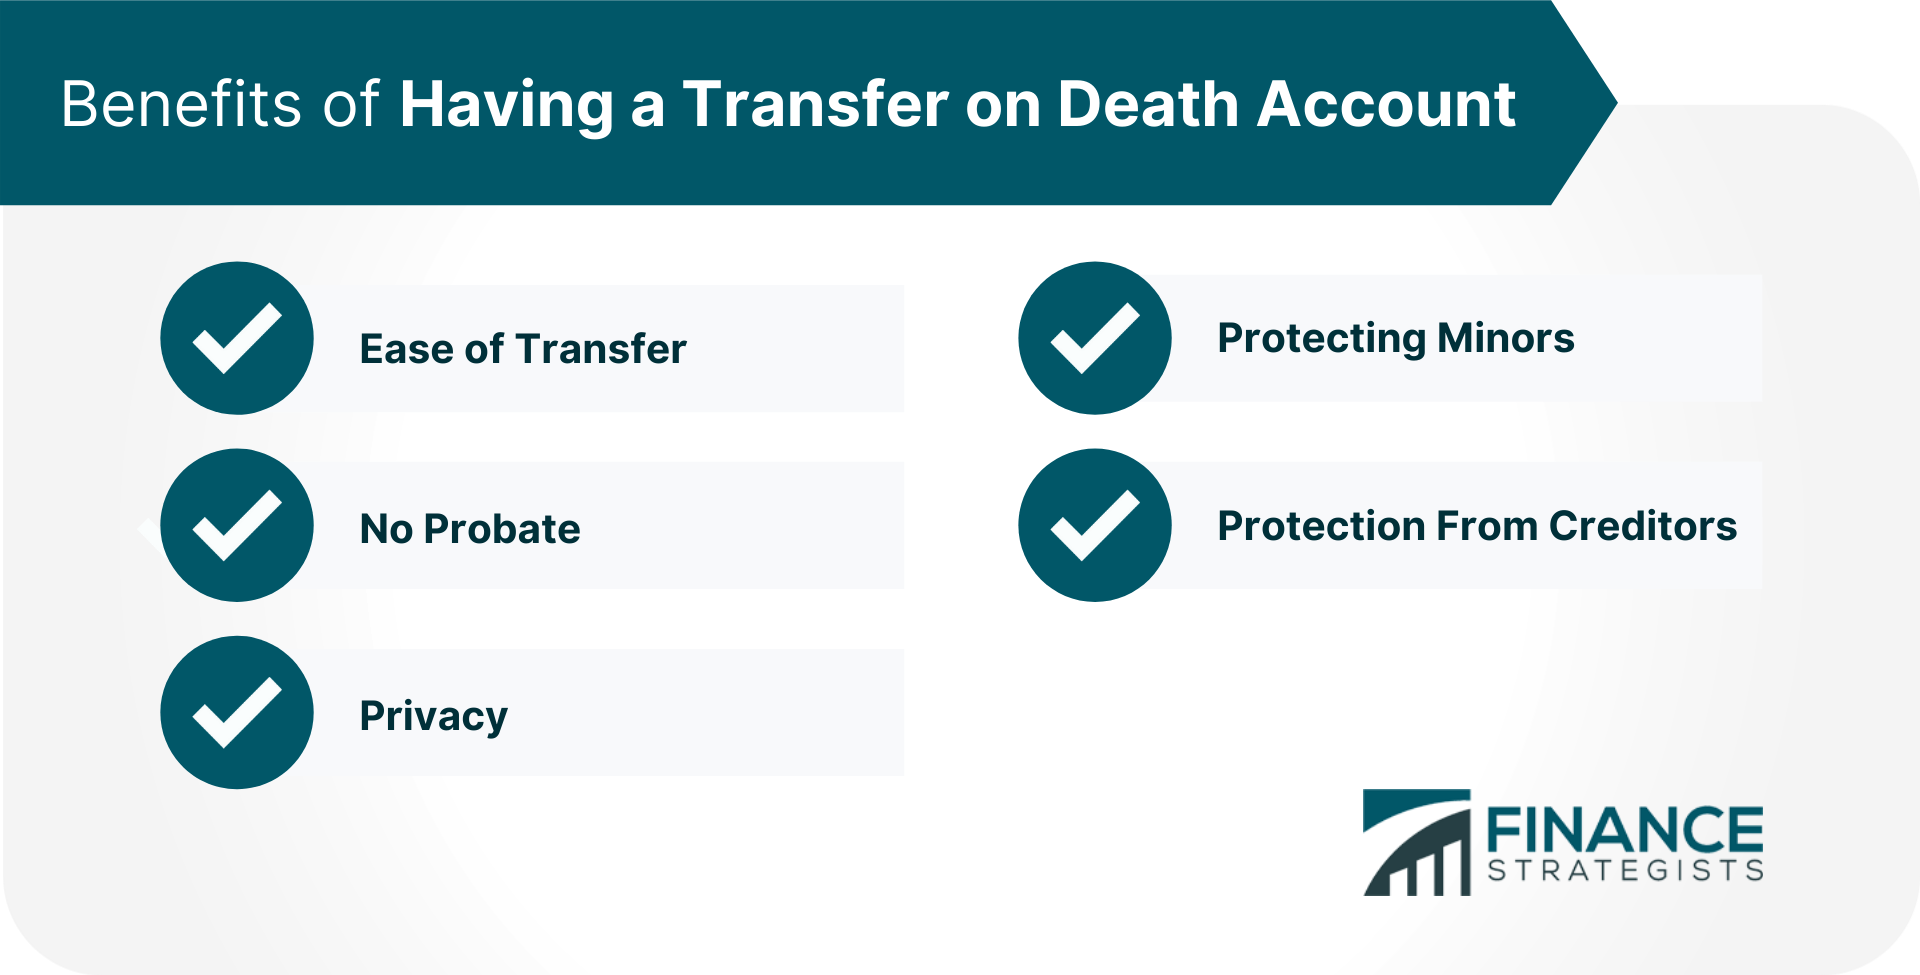 Benefits_of_Having_a_Transfer_on_Death_Account